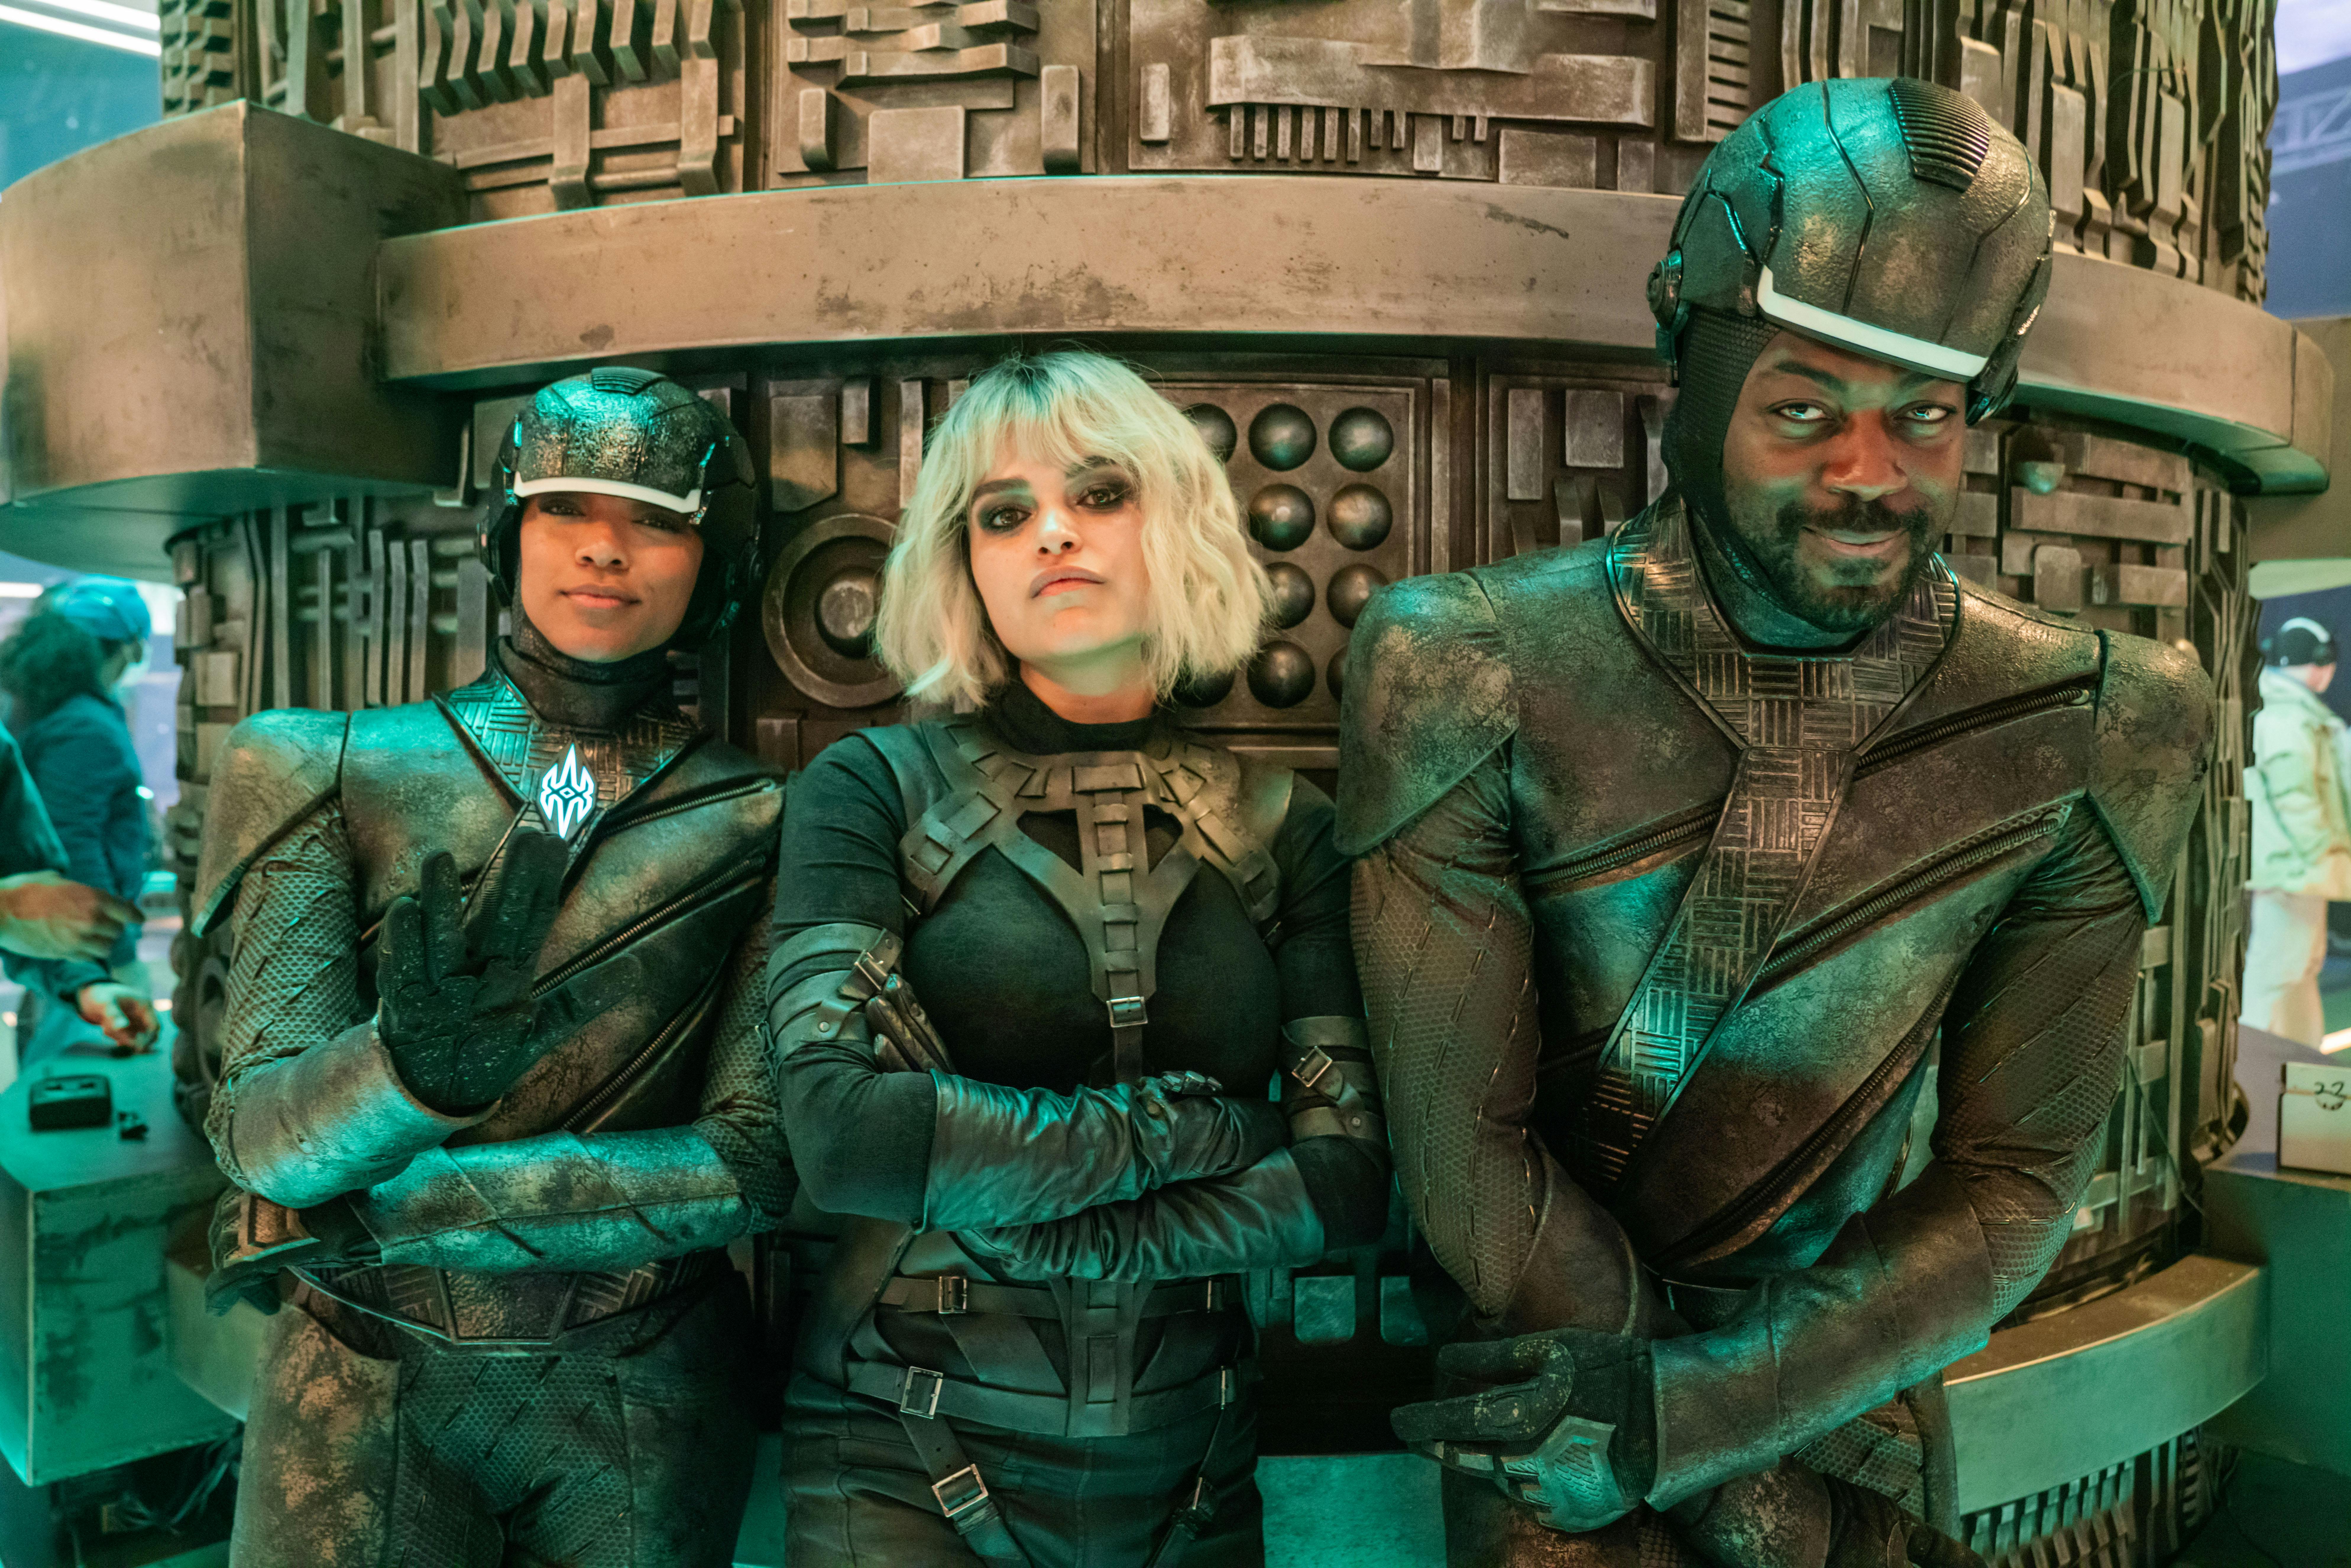 Behind-the-scenes of 'Lagrange Point' - Sonequa Martin-Green and David Ajala in Breen soldier uniform and Eve Harlow all lean against a structure on the set of the Breen dreadnaught bridge